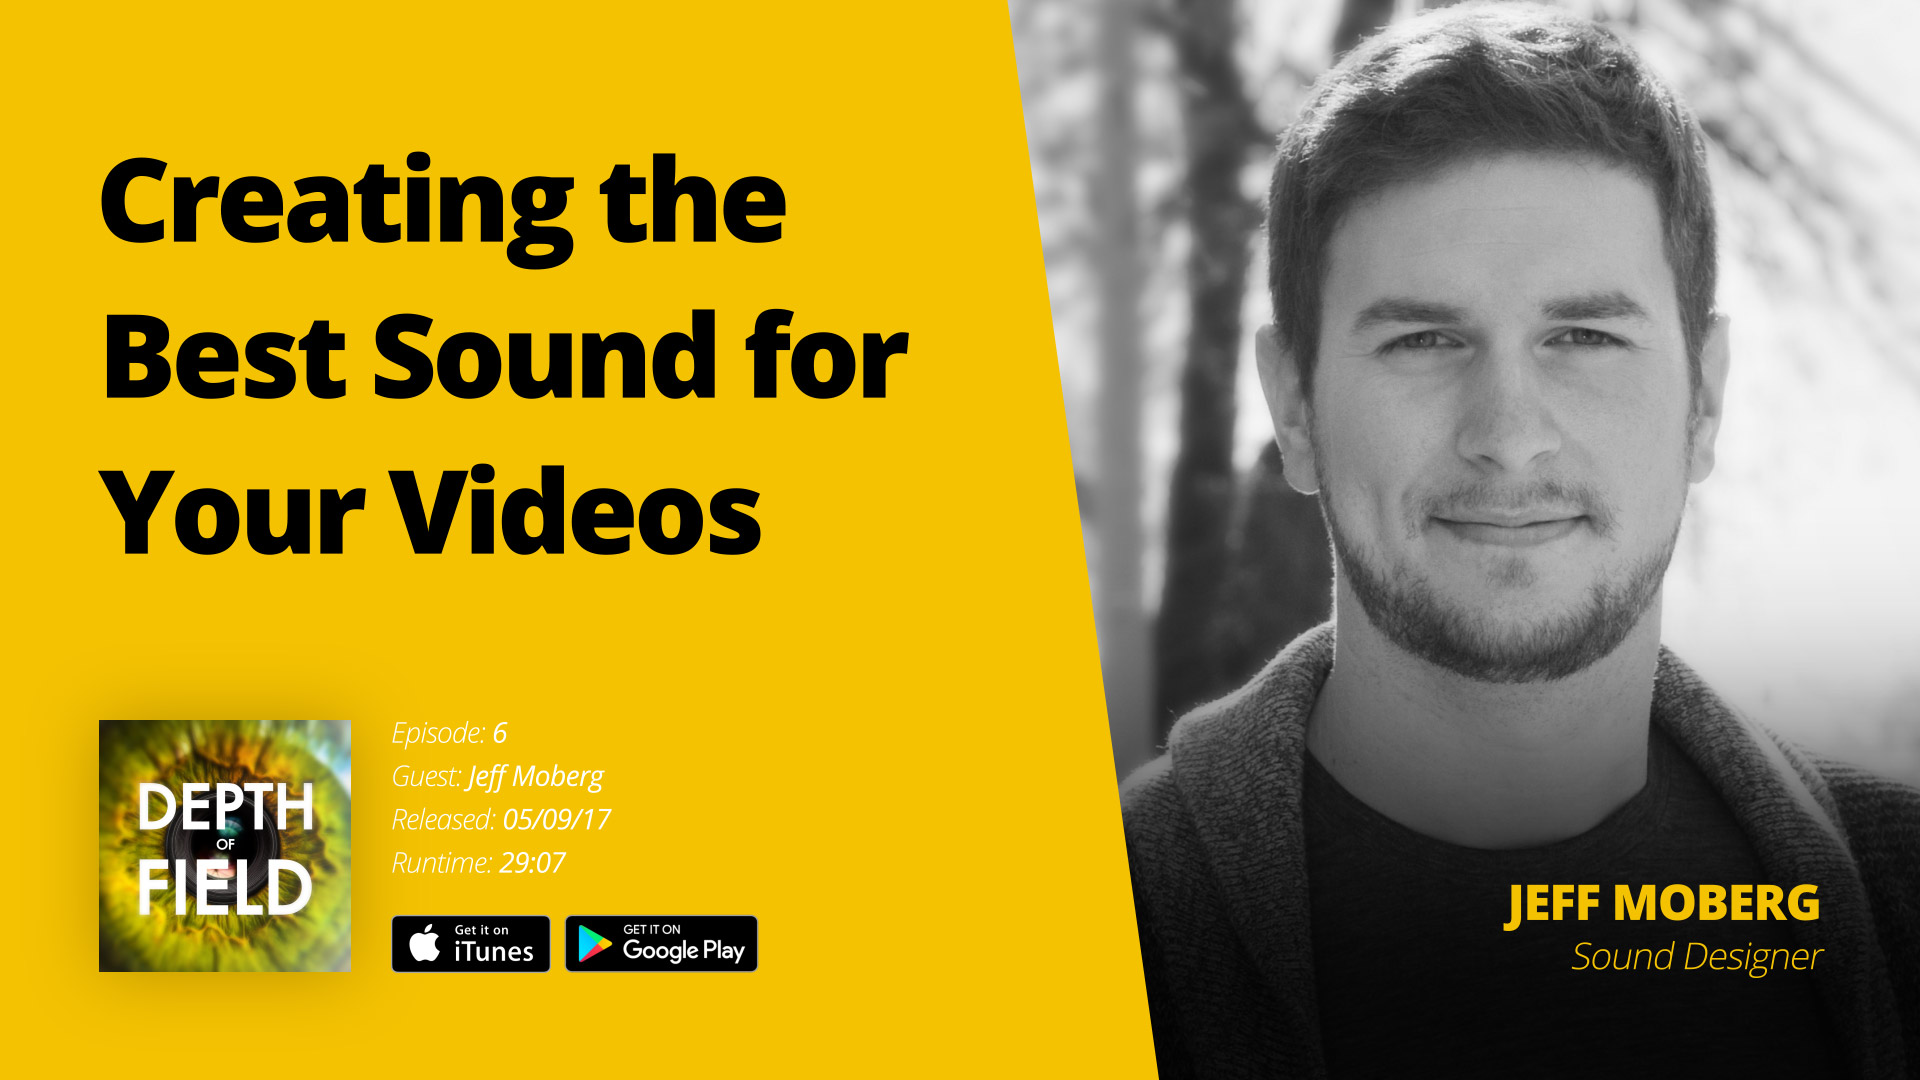 How to Create the Best Sound for Your Videos